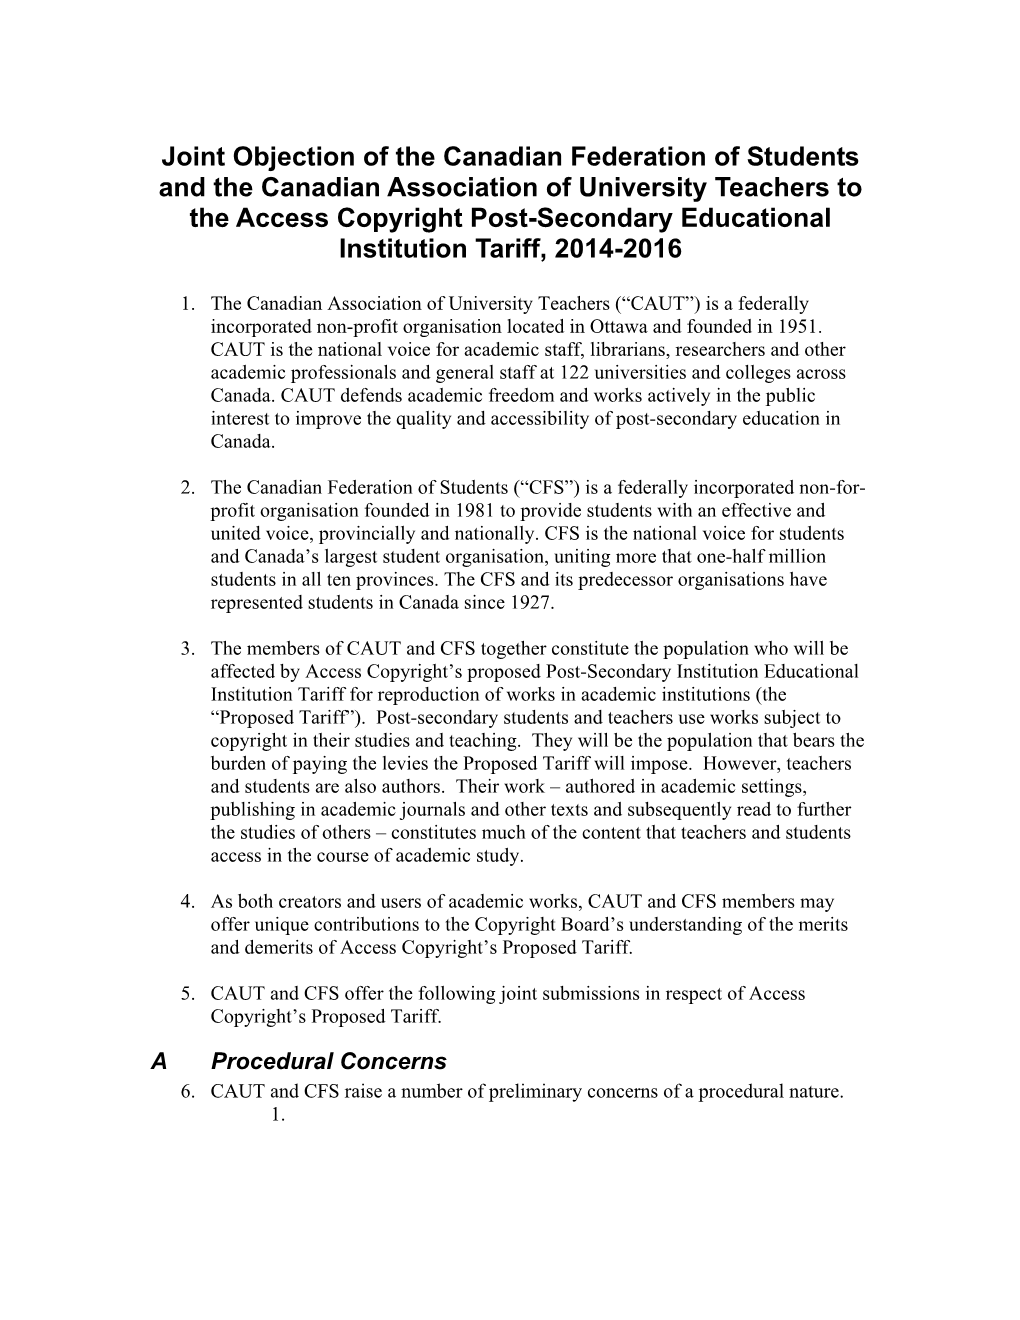 Joint Objection of the Canadian Federation of Students and The